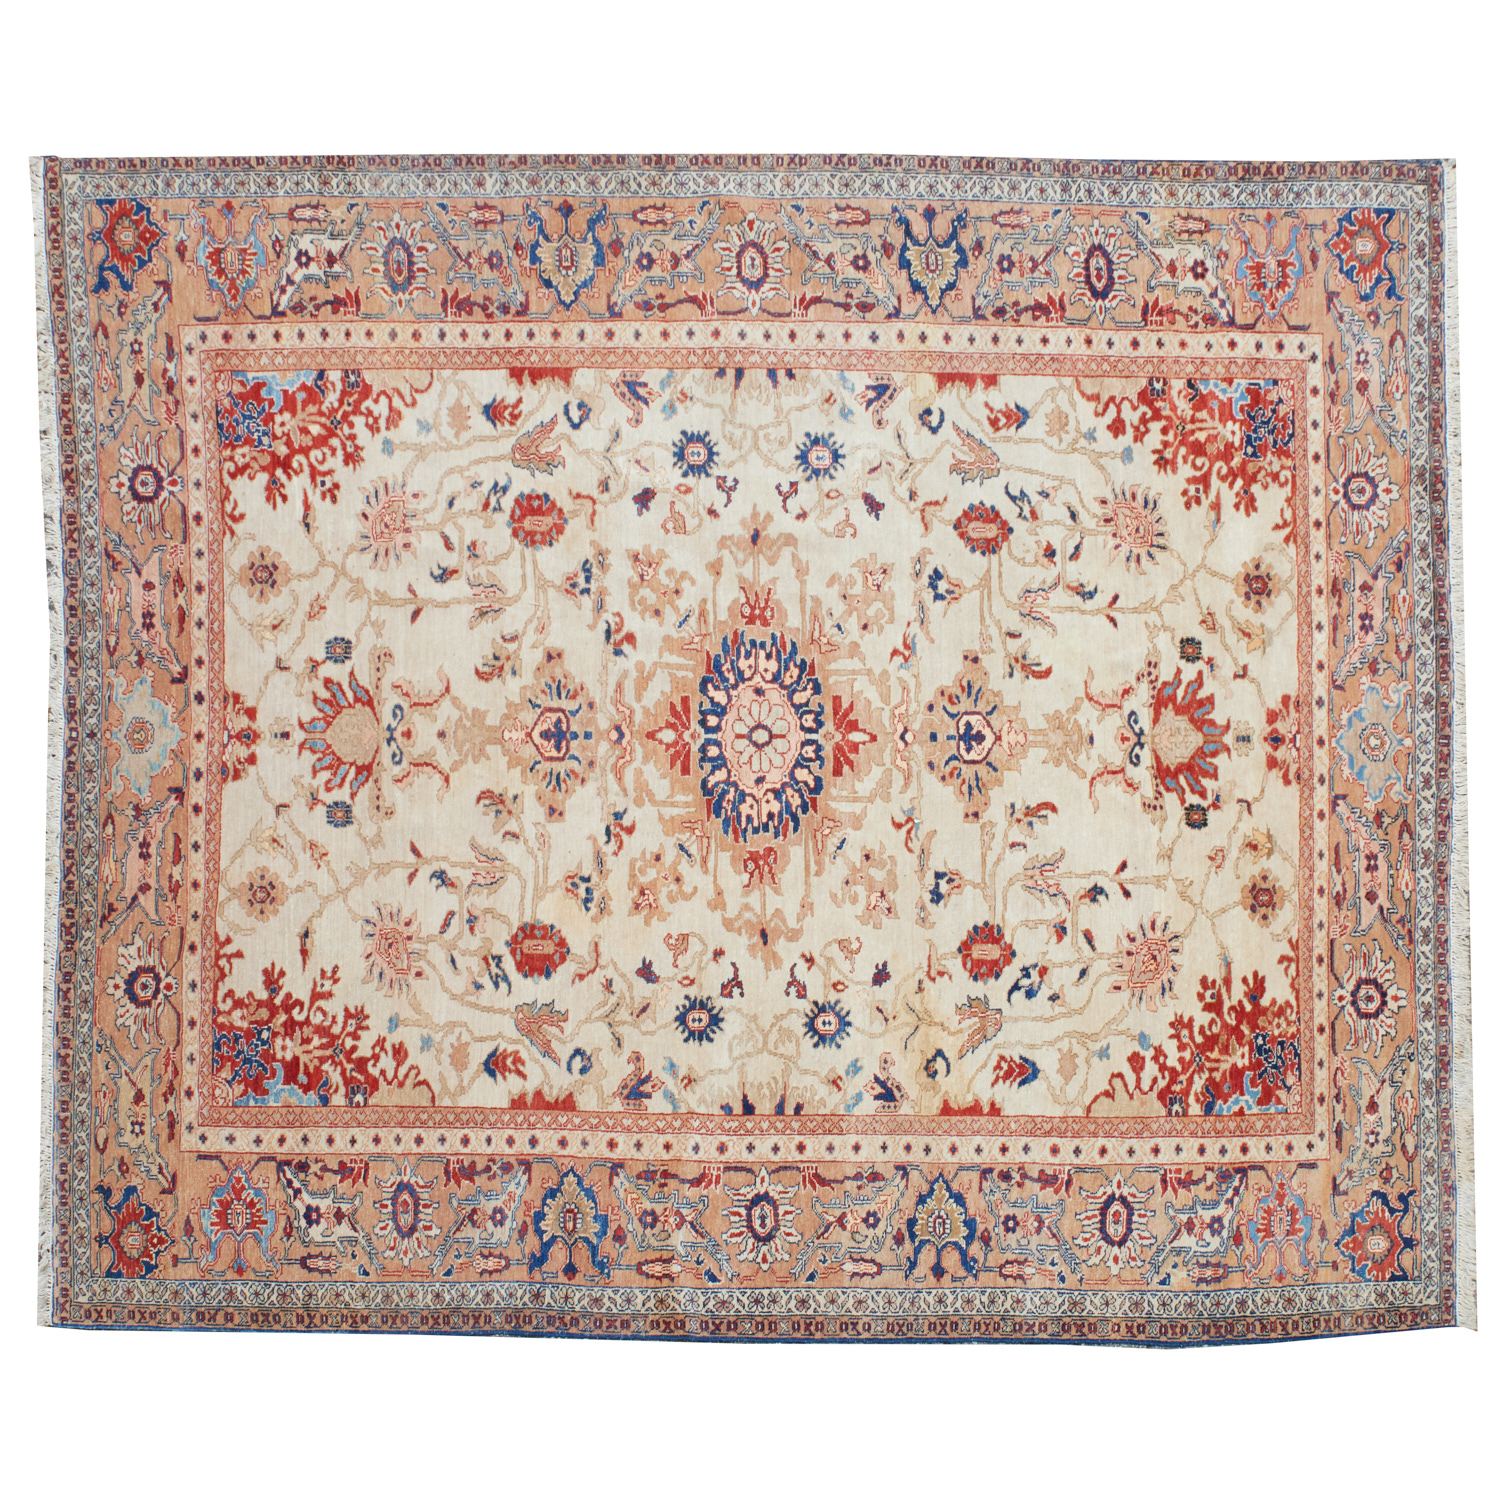 PERSIAN WOOL ROOM SIZE CARPET 20th